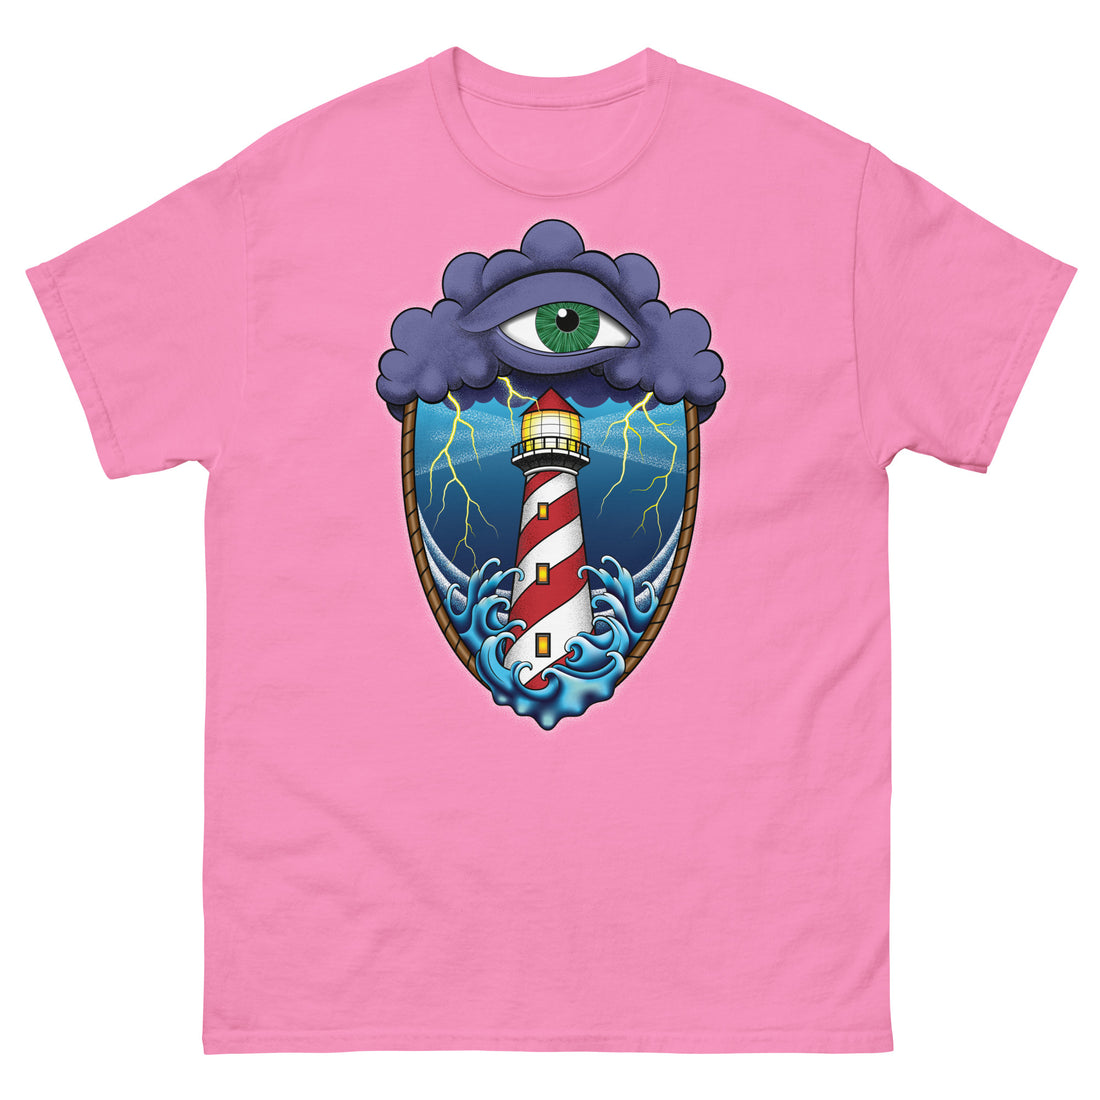 A pink t-shirt with an old school eye of the storm tattoo design of large dark purple storm clouds at the top of the design with a green eye in the middle of the clouds.  Below the clouds is an oval shape with brown rope. Inside the rope are stormy seas and a lighthouse with lightning striking in the background.  At the bottom of the design, some of the waves are spilling out of the rope barrier. The sky and seas are hues of blue; the lighthouse is white and red striped like a barber pole.